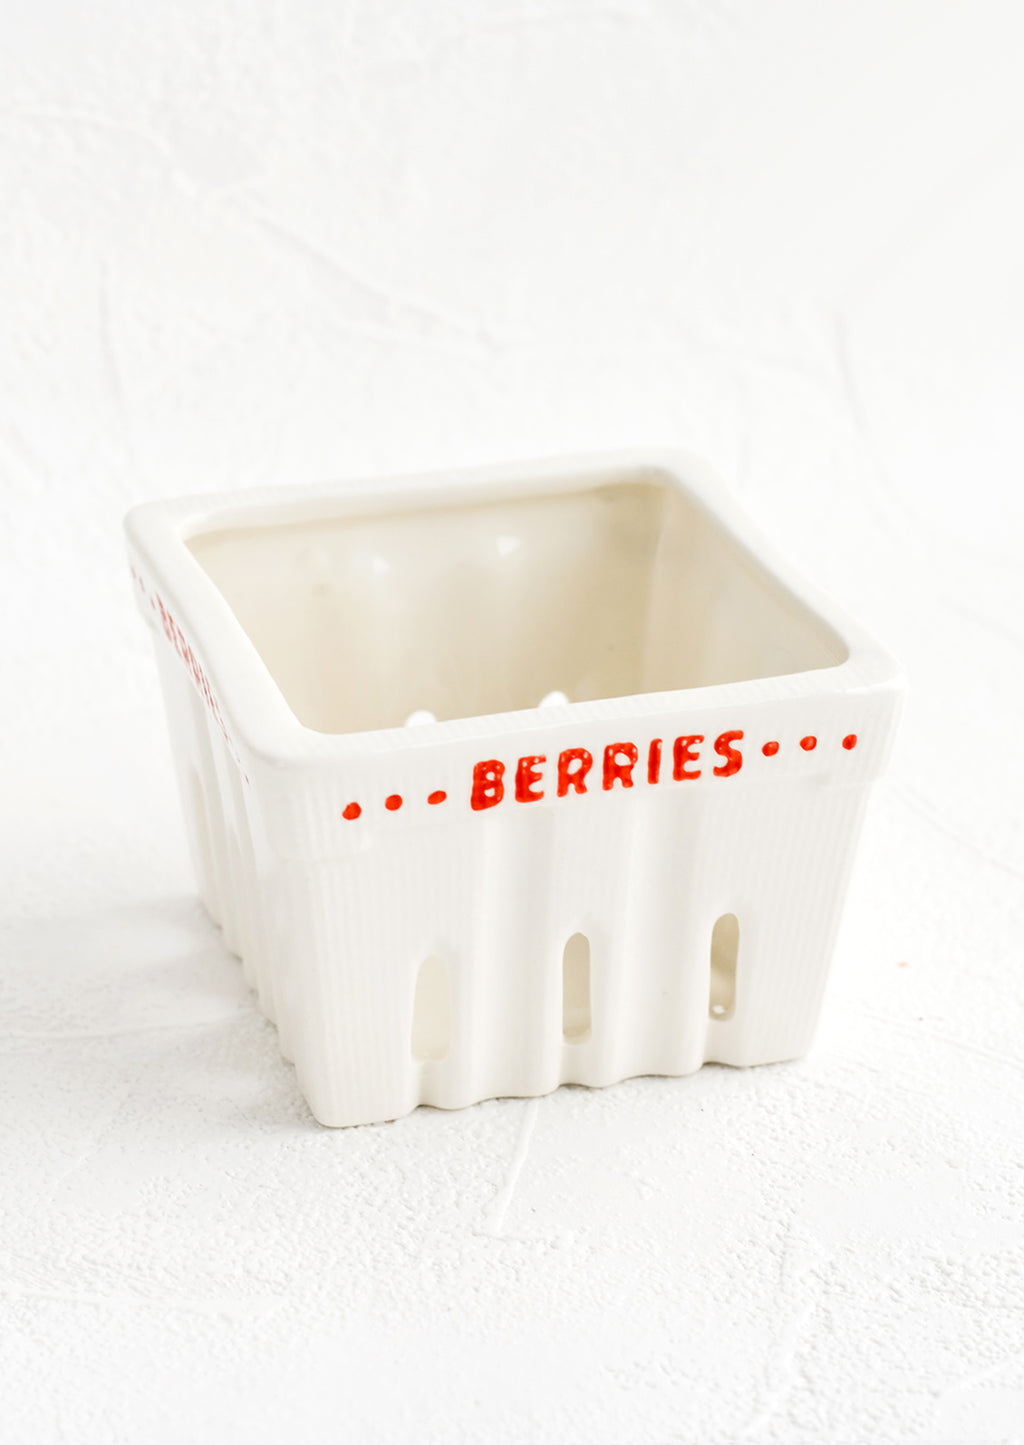 Berries: A white ceramic basket designed to look like a berry basket with "Berries" printed in red lettering.